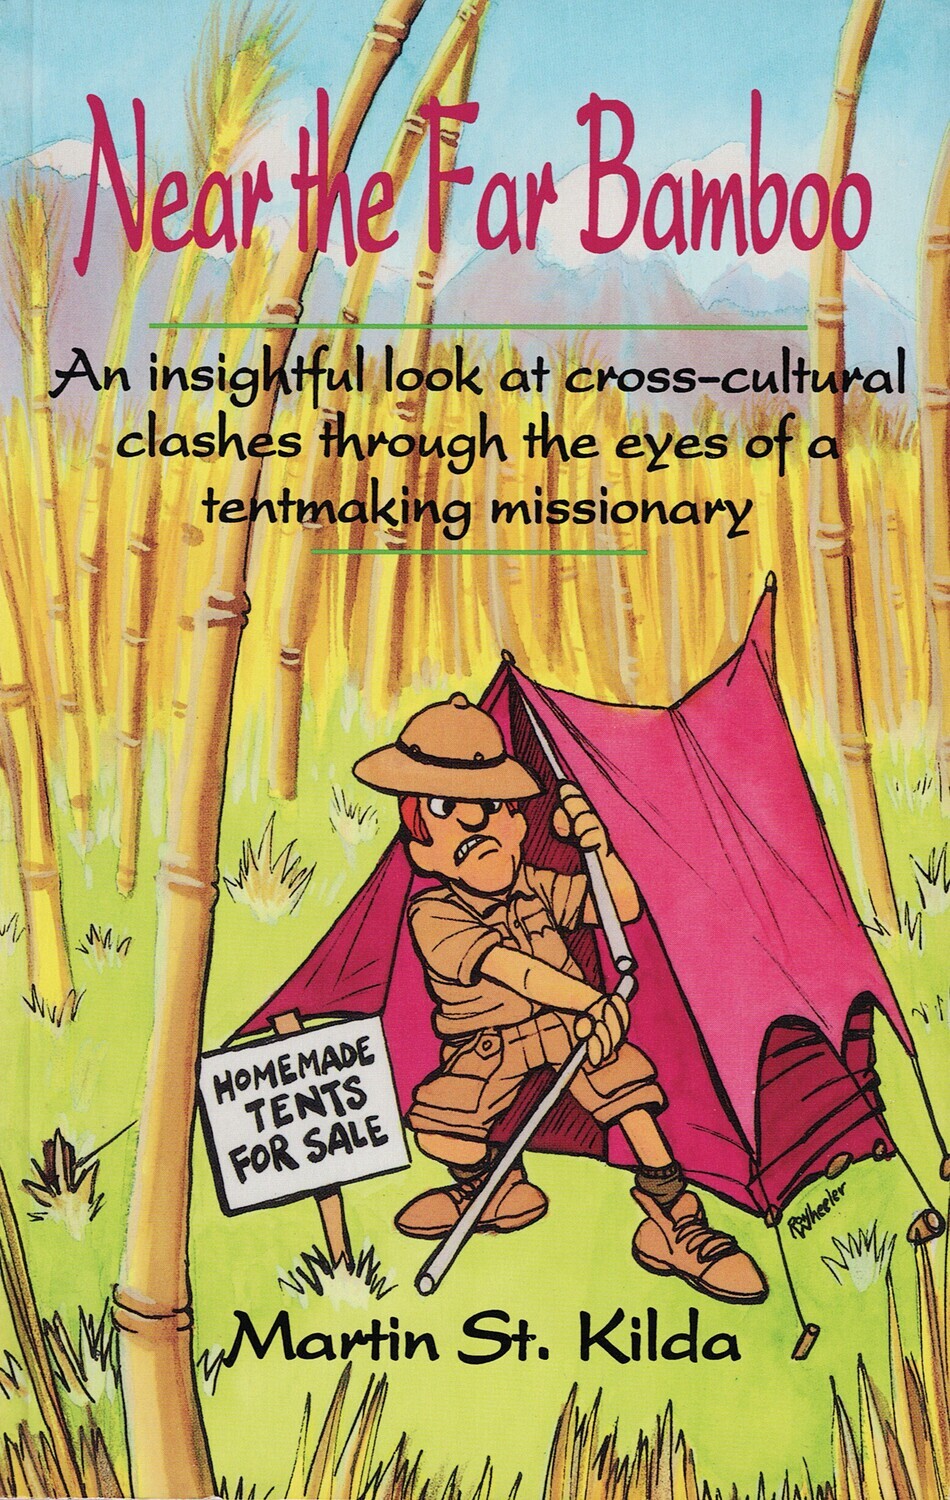 Near the Far Bamboo: An Insightful Look at Cross-Cultural Clashes through the Eyes of a Tentmaking Missionary